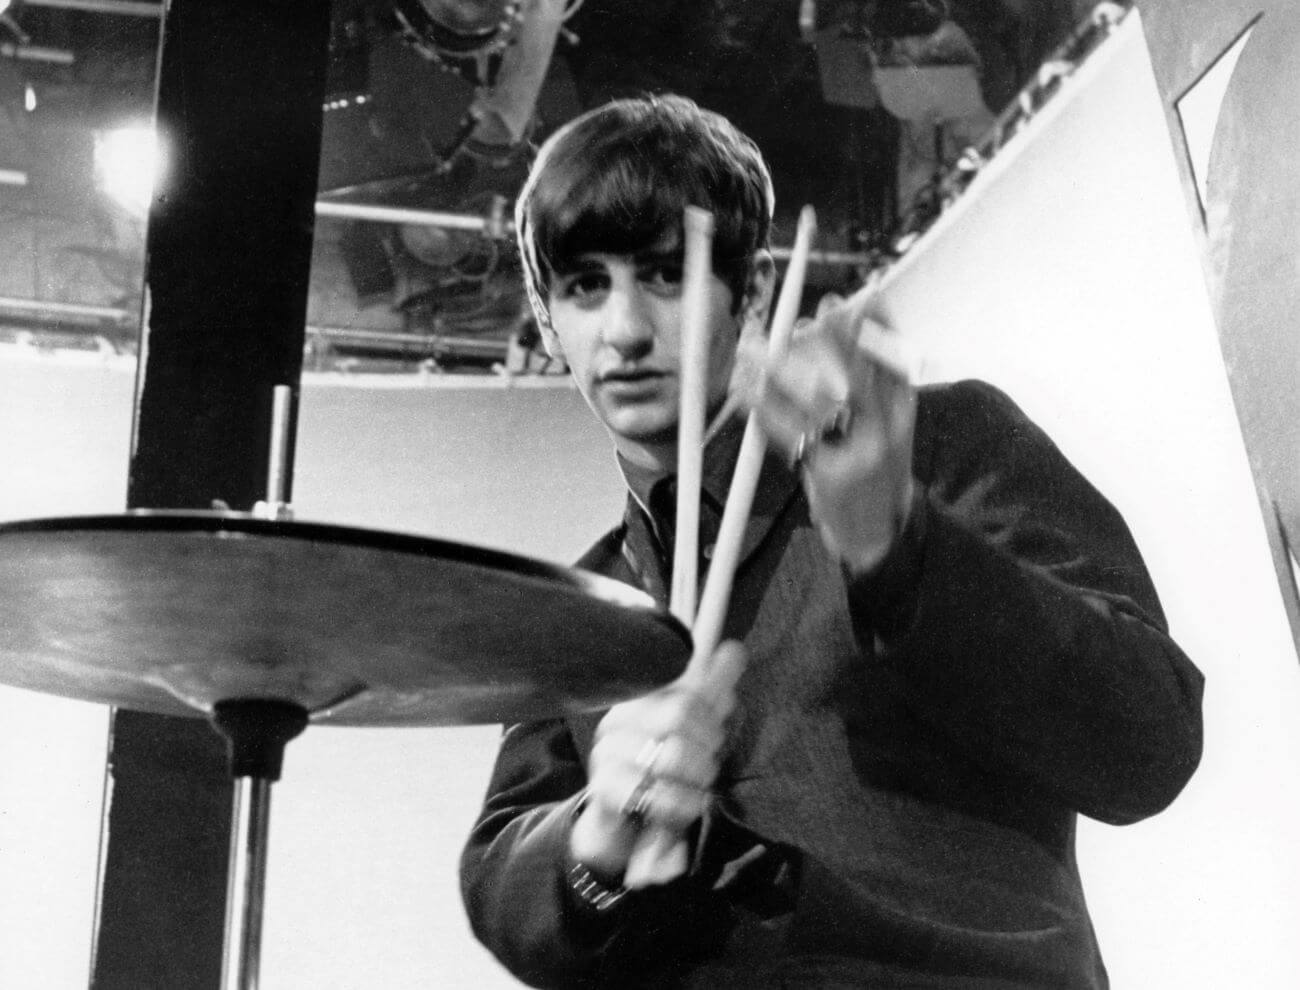 A black and white picture of Ringo Starr sitting at his drum set and holding drum sticks.